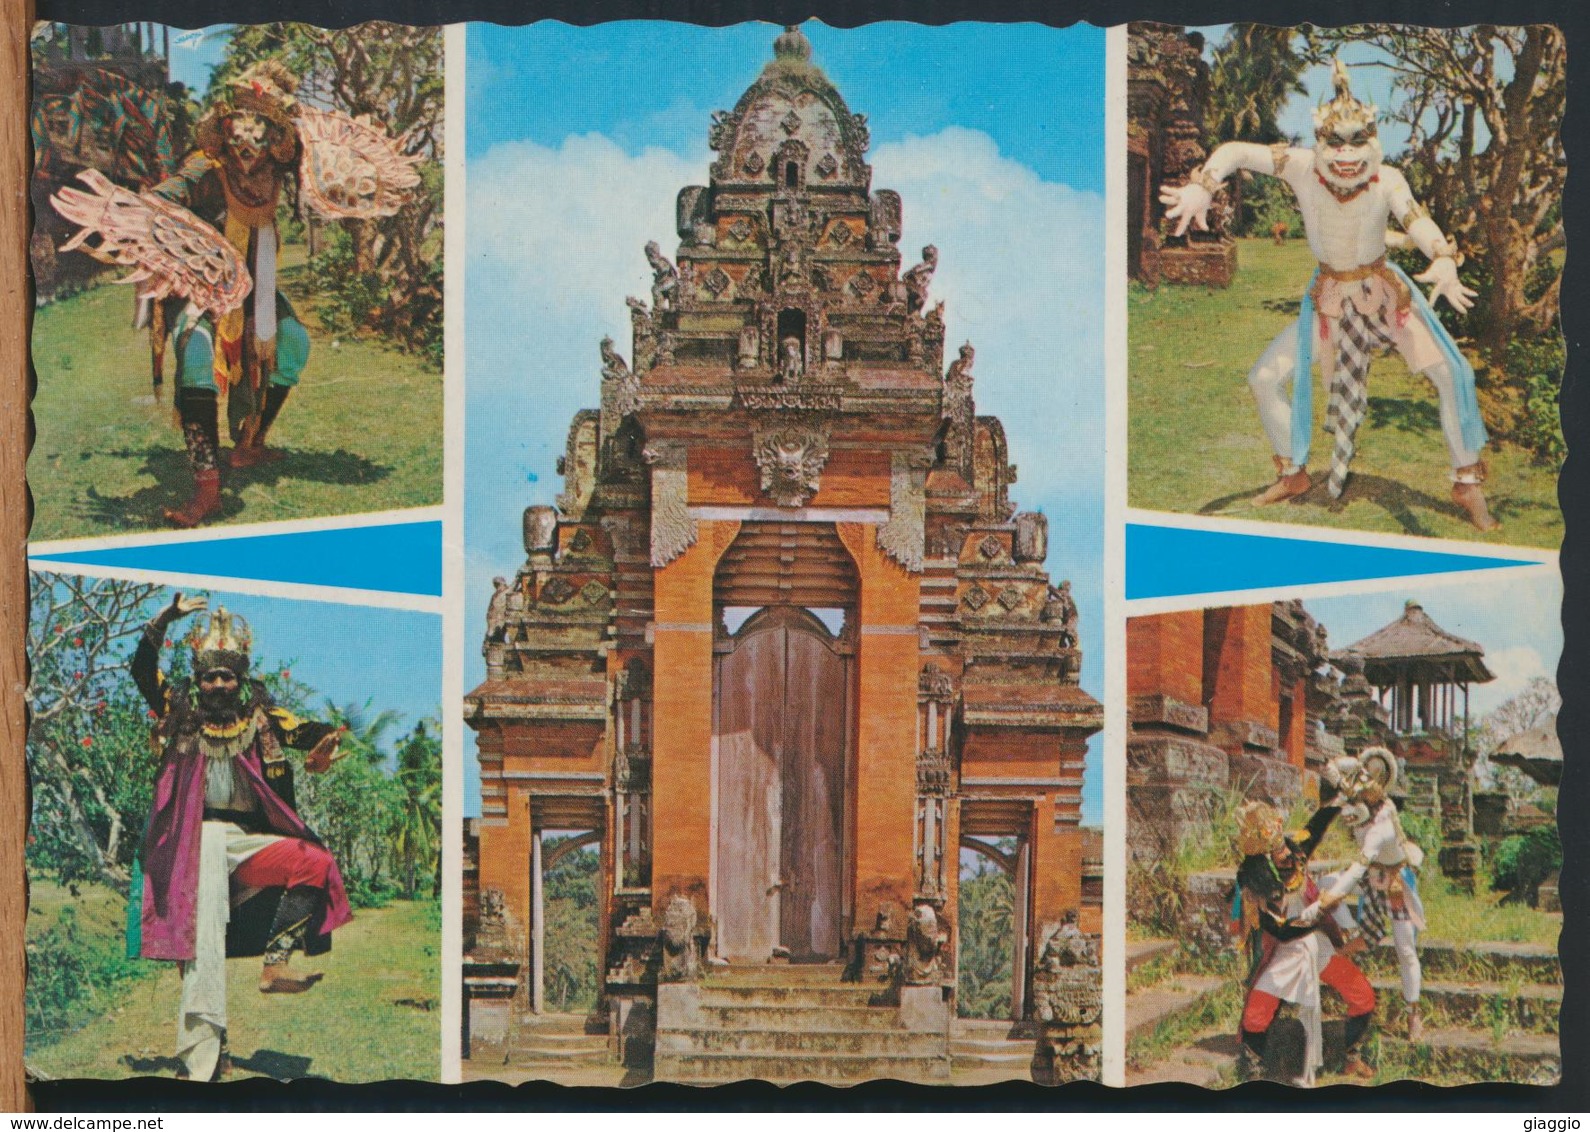 °°° 12138 - INDONESIA - BALI - SEVERAL ACTS IN RAMAYANA DANCE - VIEWS °°° - Indonesia